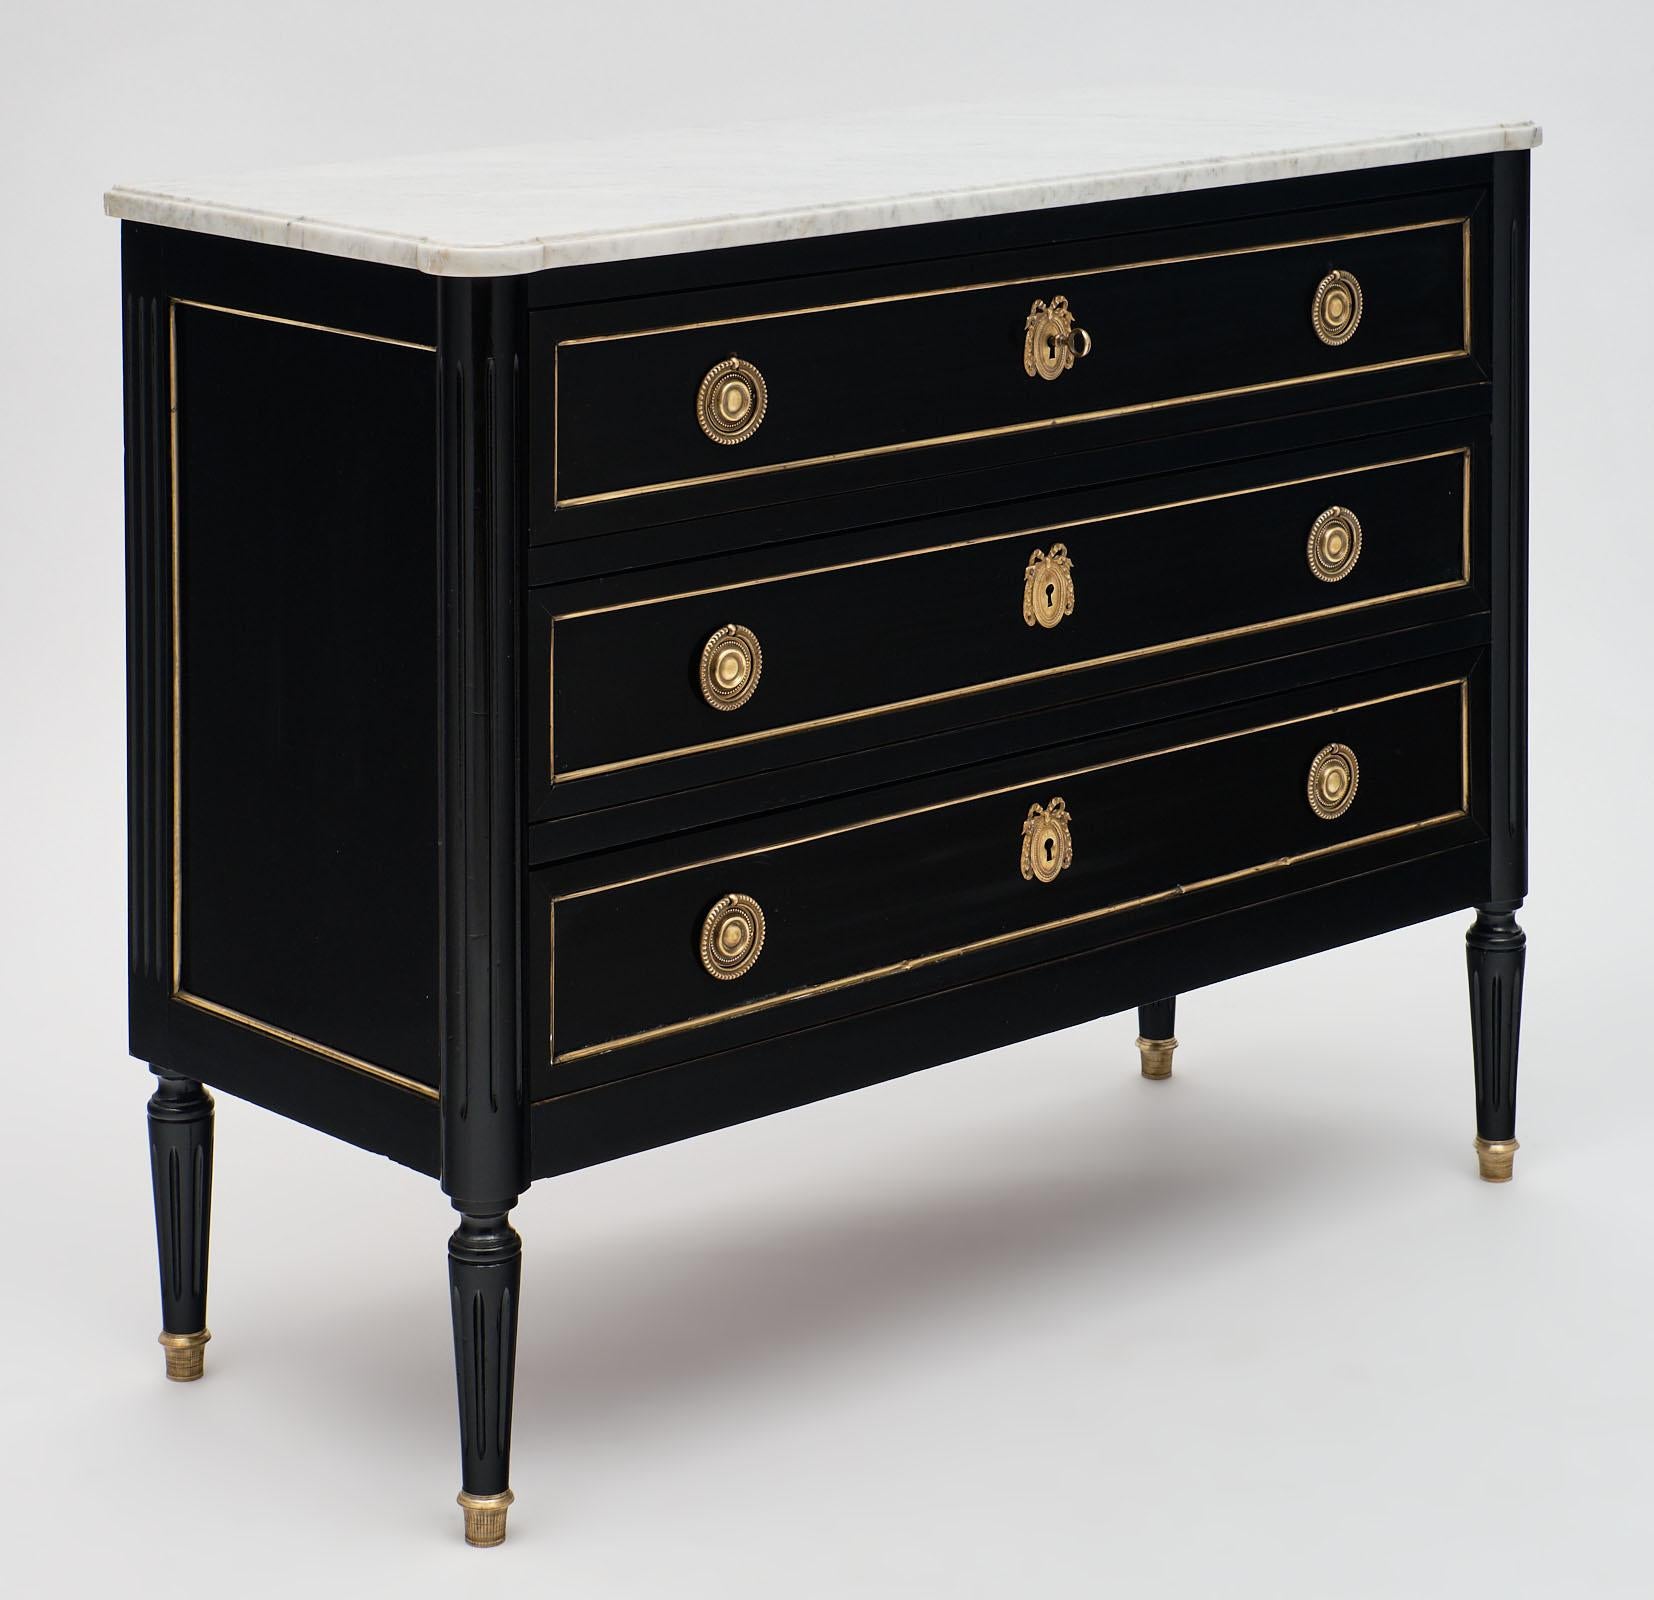 Carrara marble topped Louis XVI chest with a ebonized mahogany base and original brass trim and hardware throughout. The key and lock are in working order and add functionality to this classic case piece. It has been finished with a lustrous French